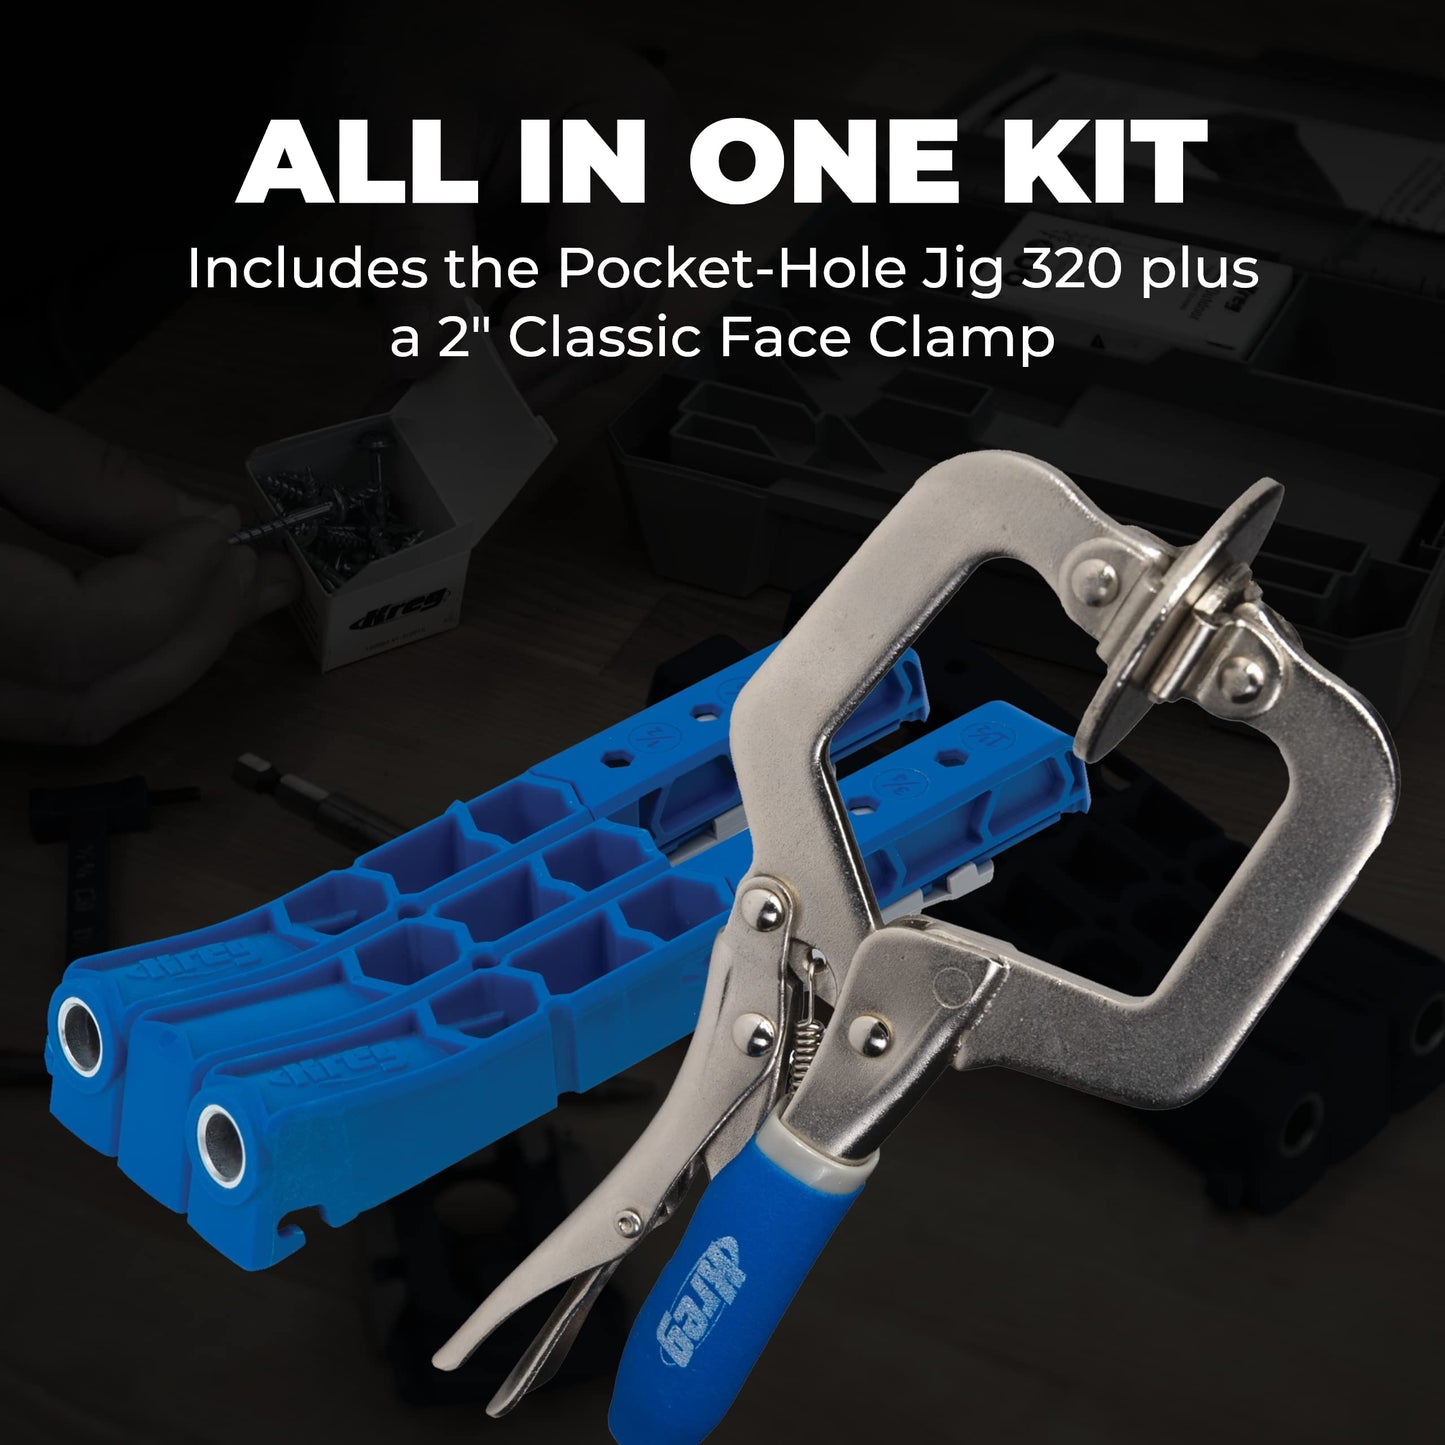 Durable Kreg Pocket-Hole Jig 320 with Classic 2" Face Clamp - Includes Wood Clamps for Woodworking & Tight Spaces - For Materials 1/2" to 1 1/2"